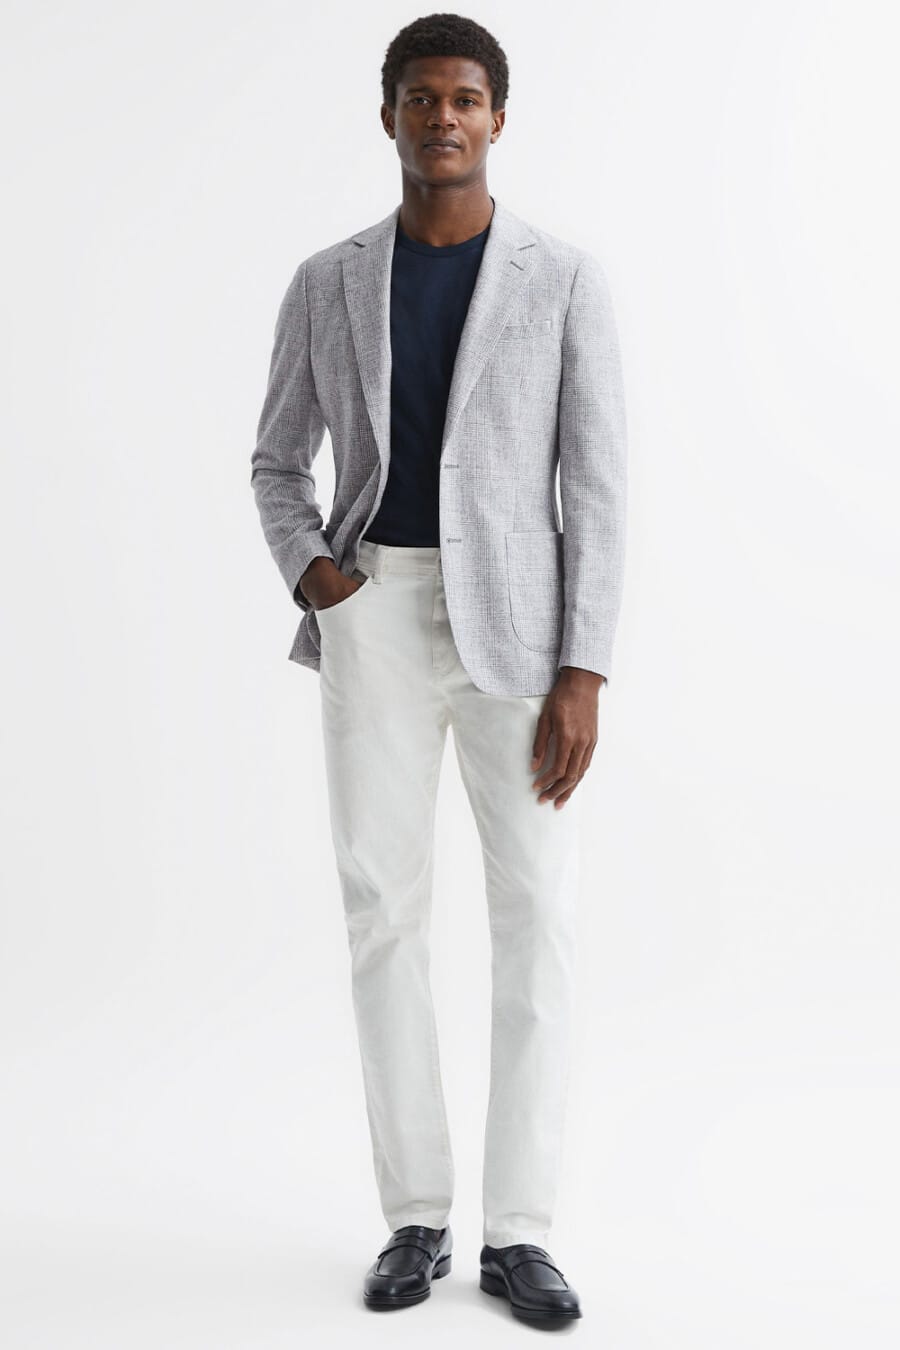 Men's white pants, tucked in navy T-shirt, light grey checked blazer and black leather penny loafers business casual outfit